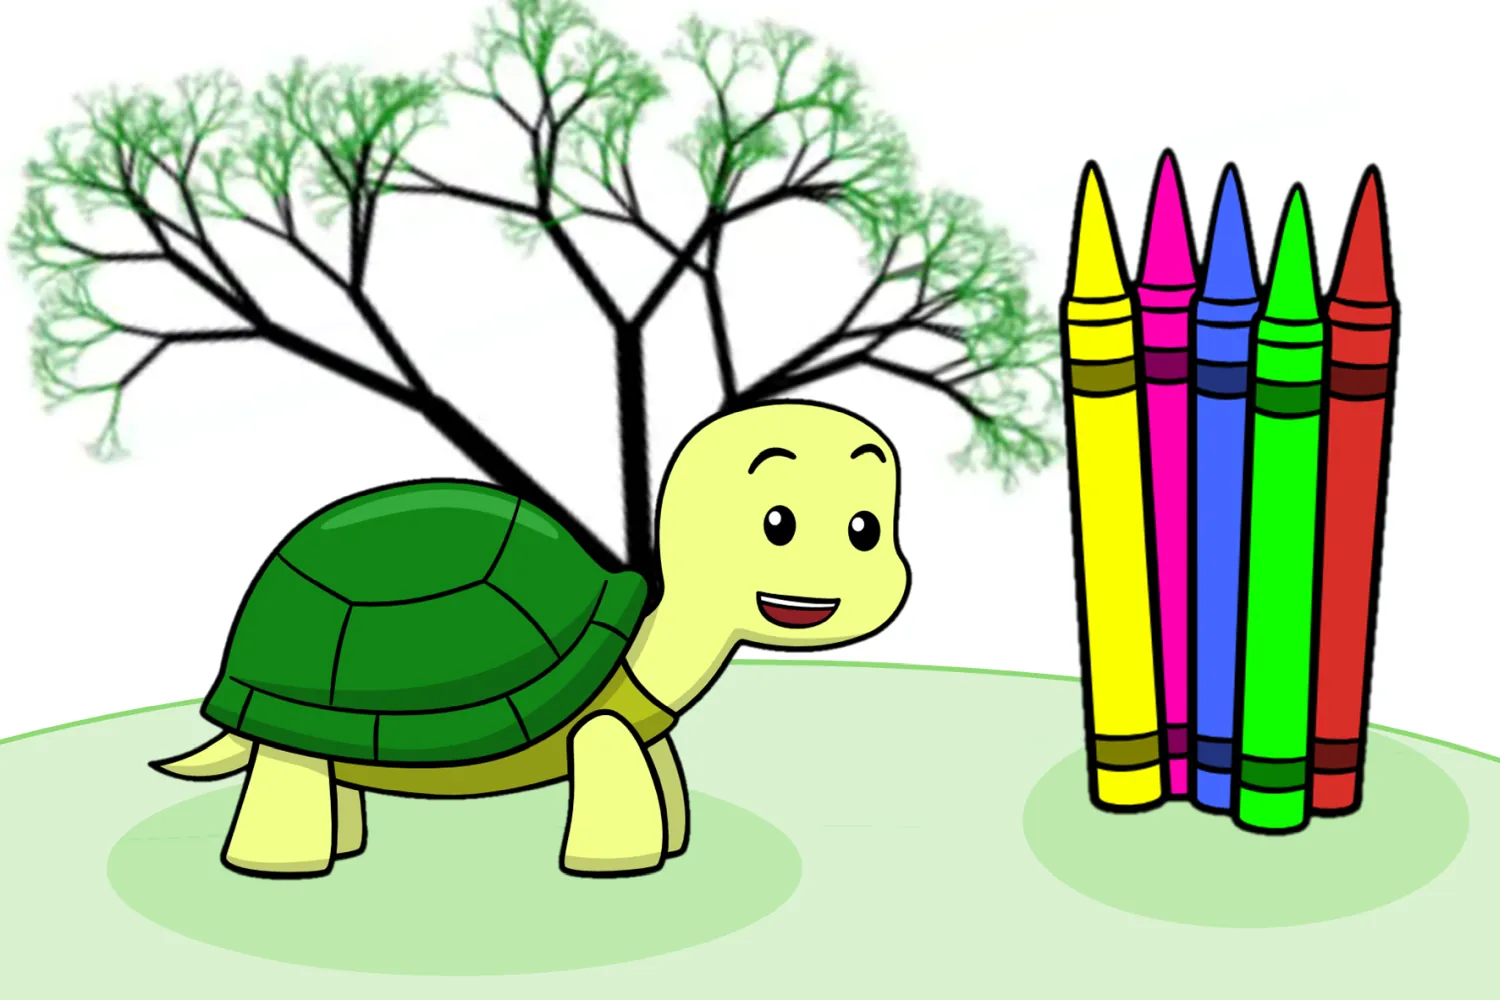 A turtle and crayons shown above a fractal generated tree